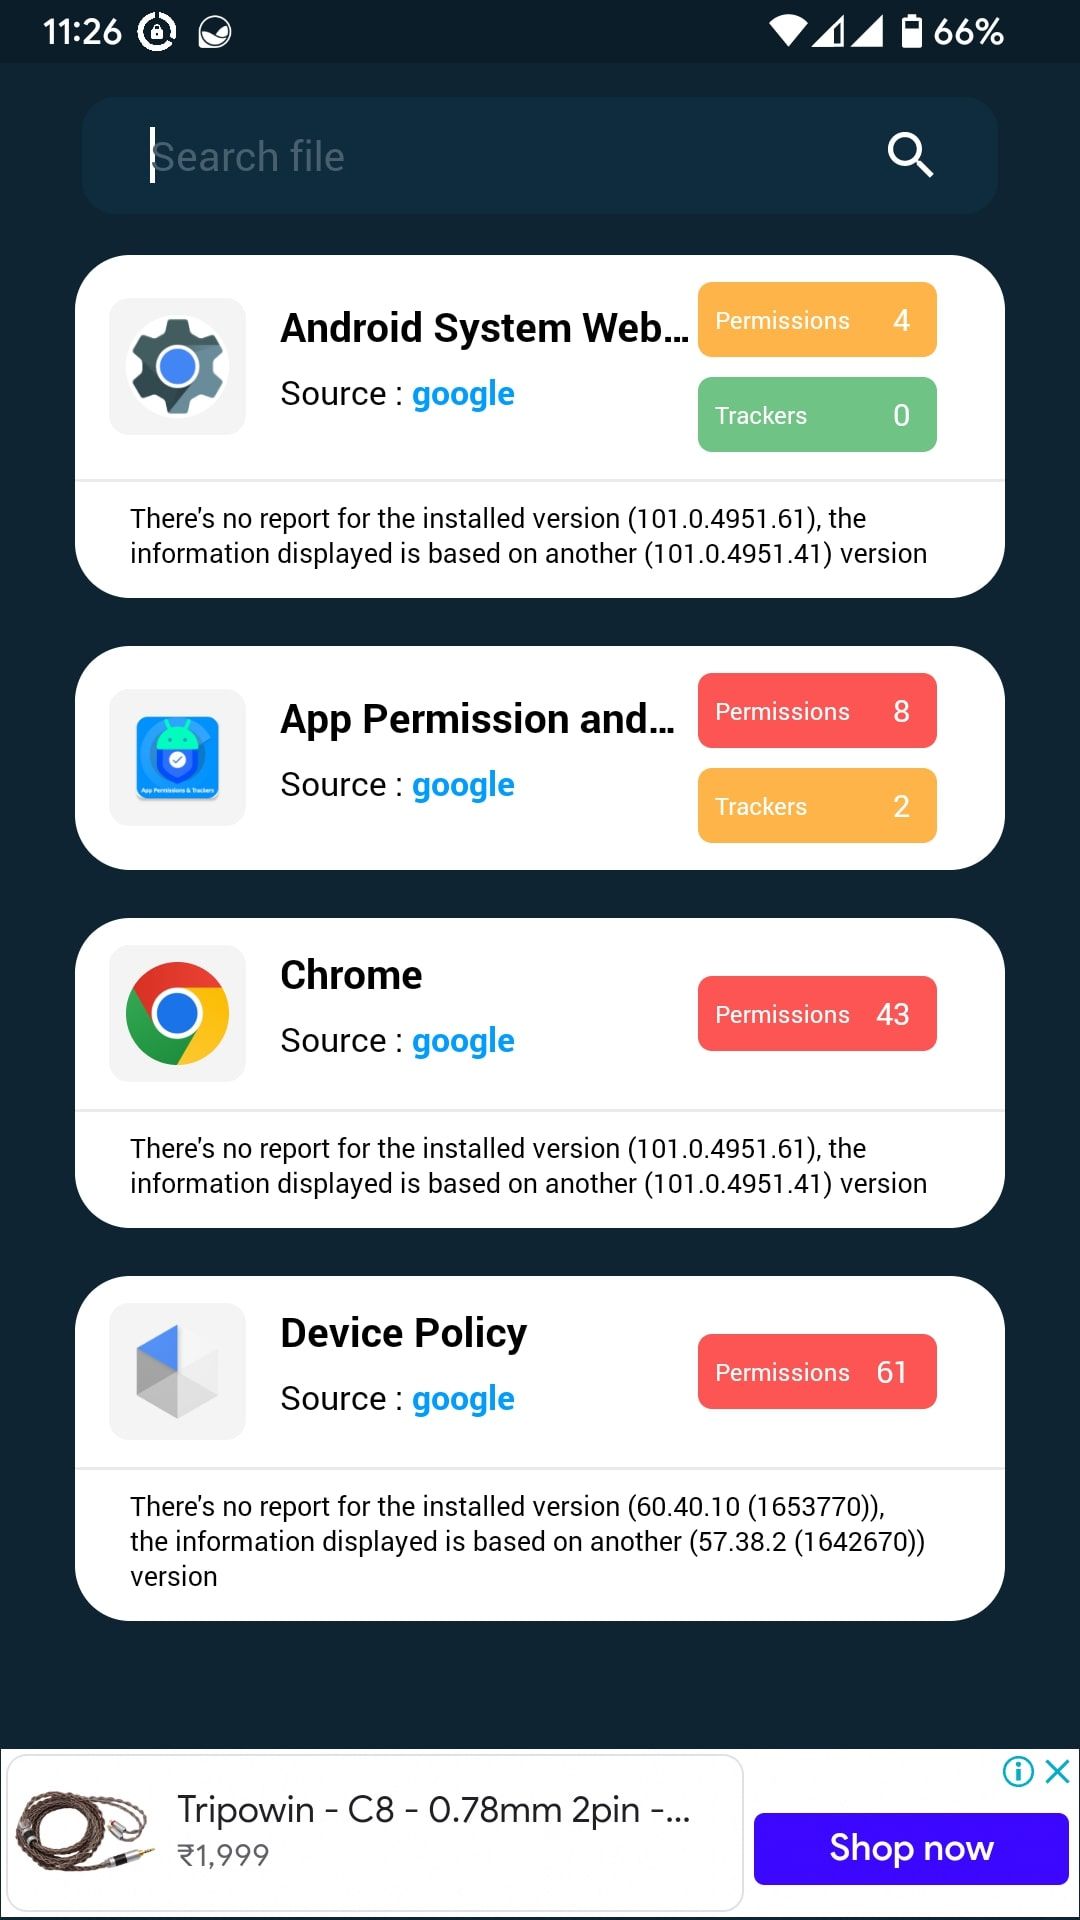 App Permission and Tracker Home Page